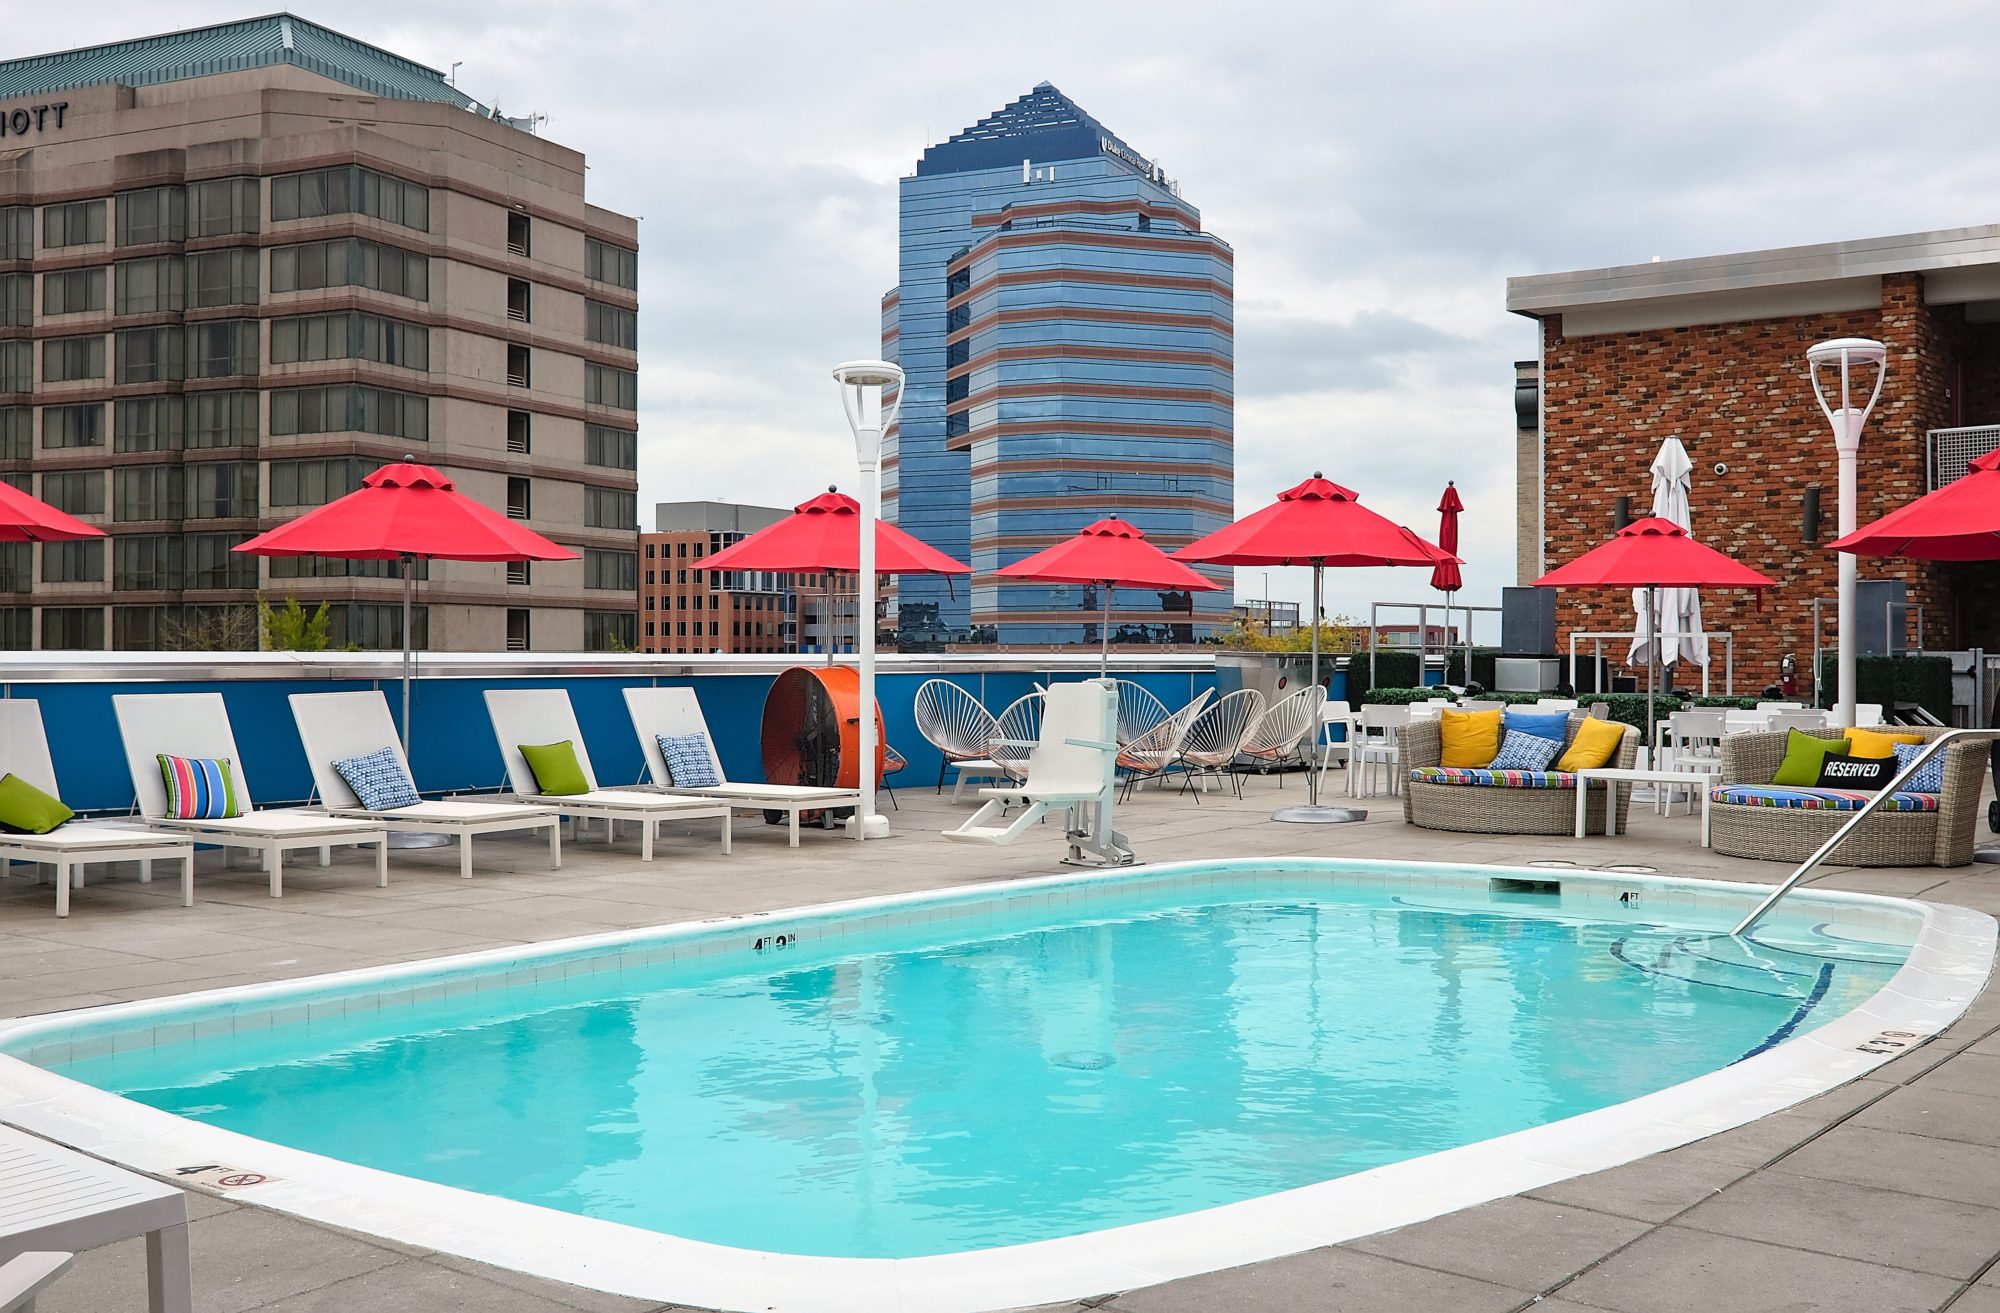 The pool deck at Unscripted Durham